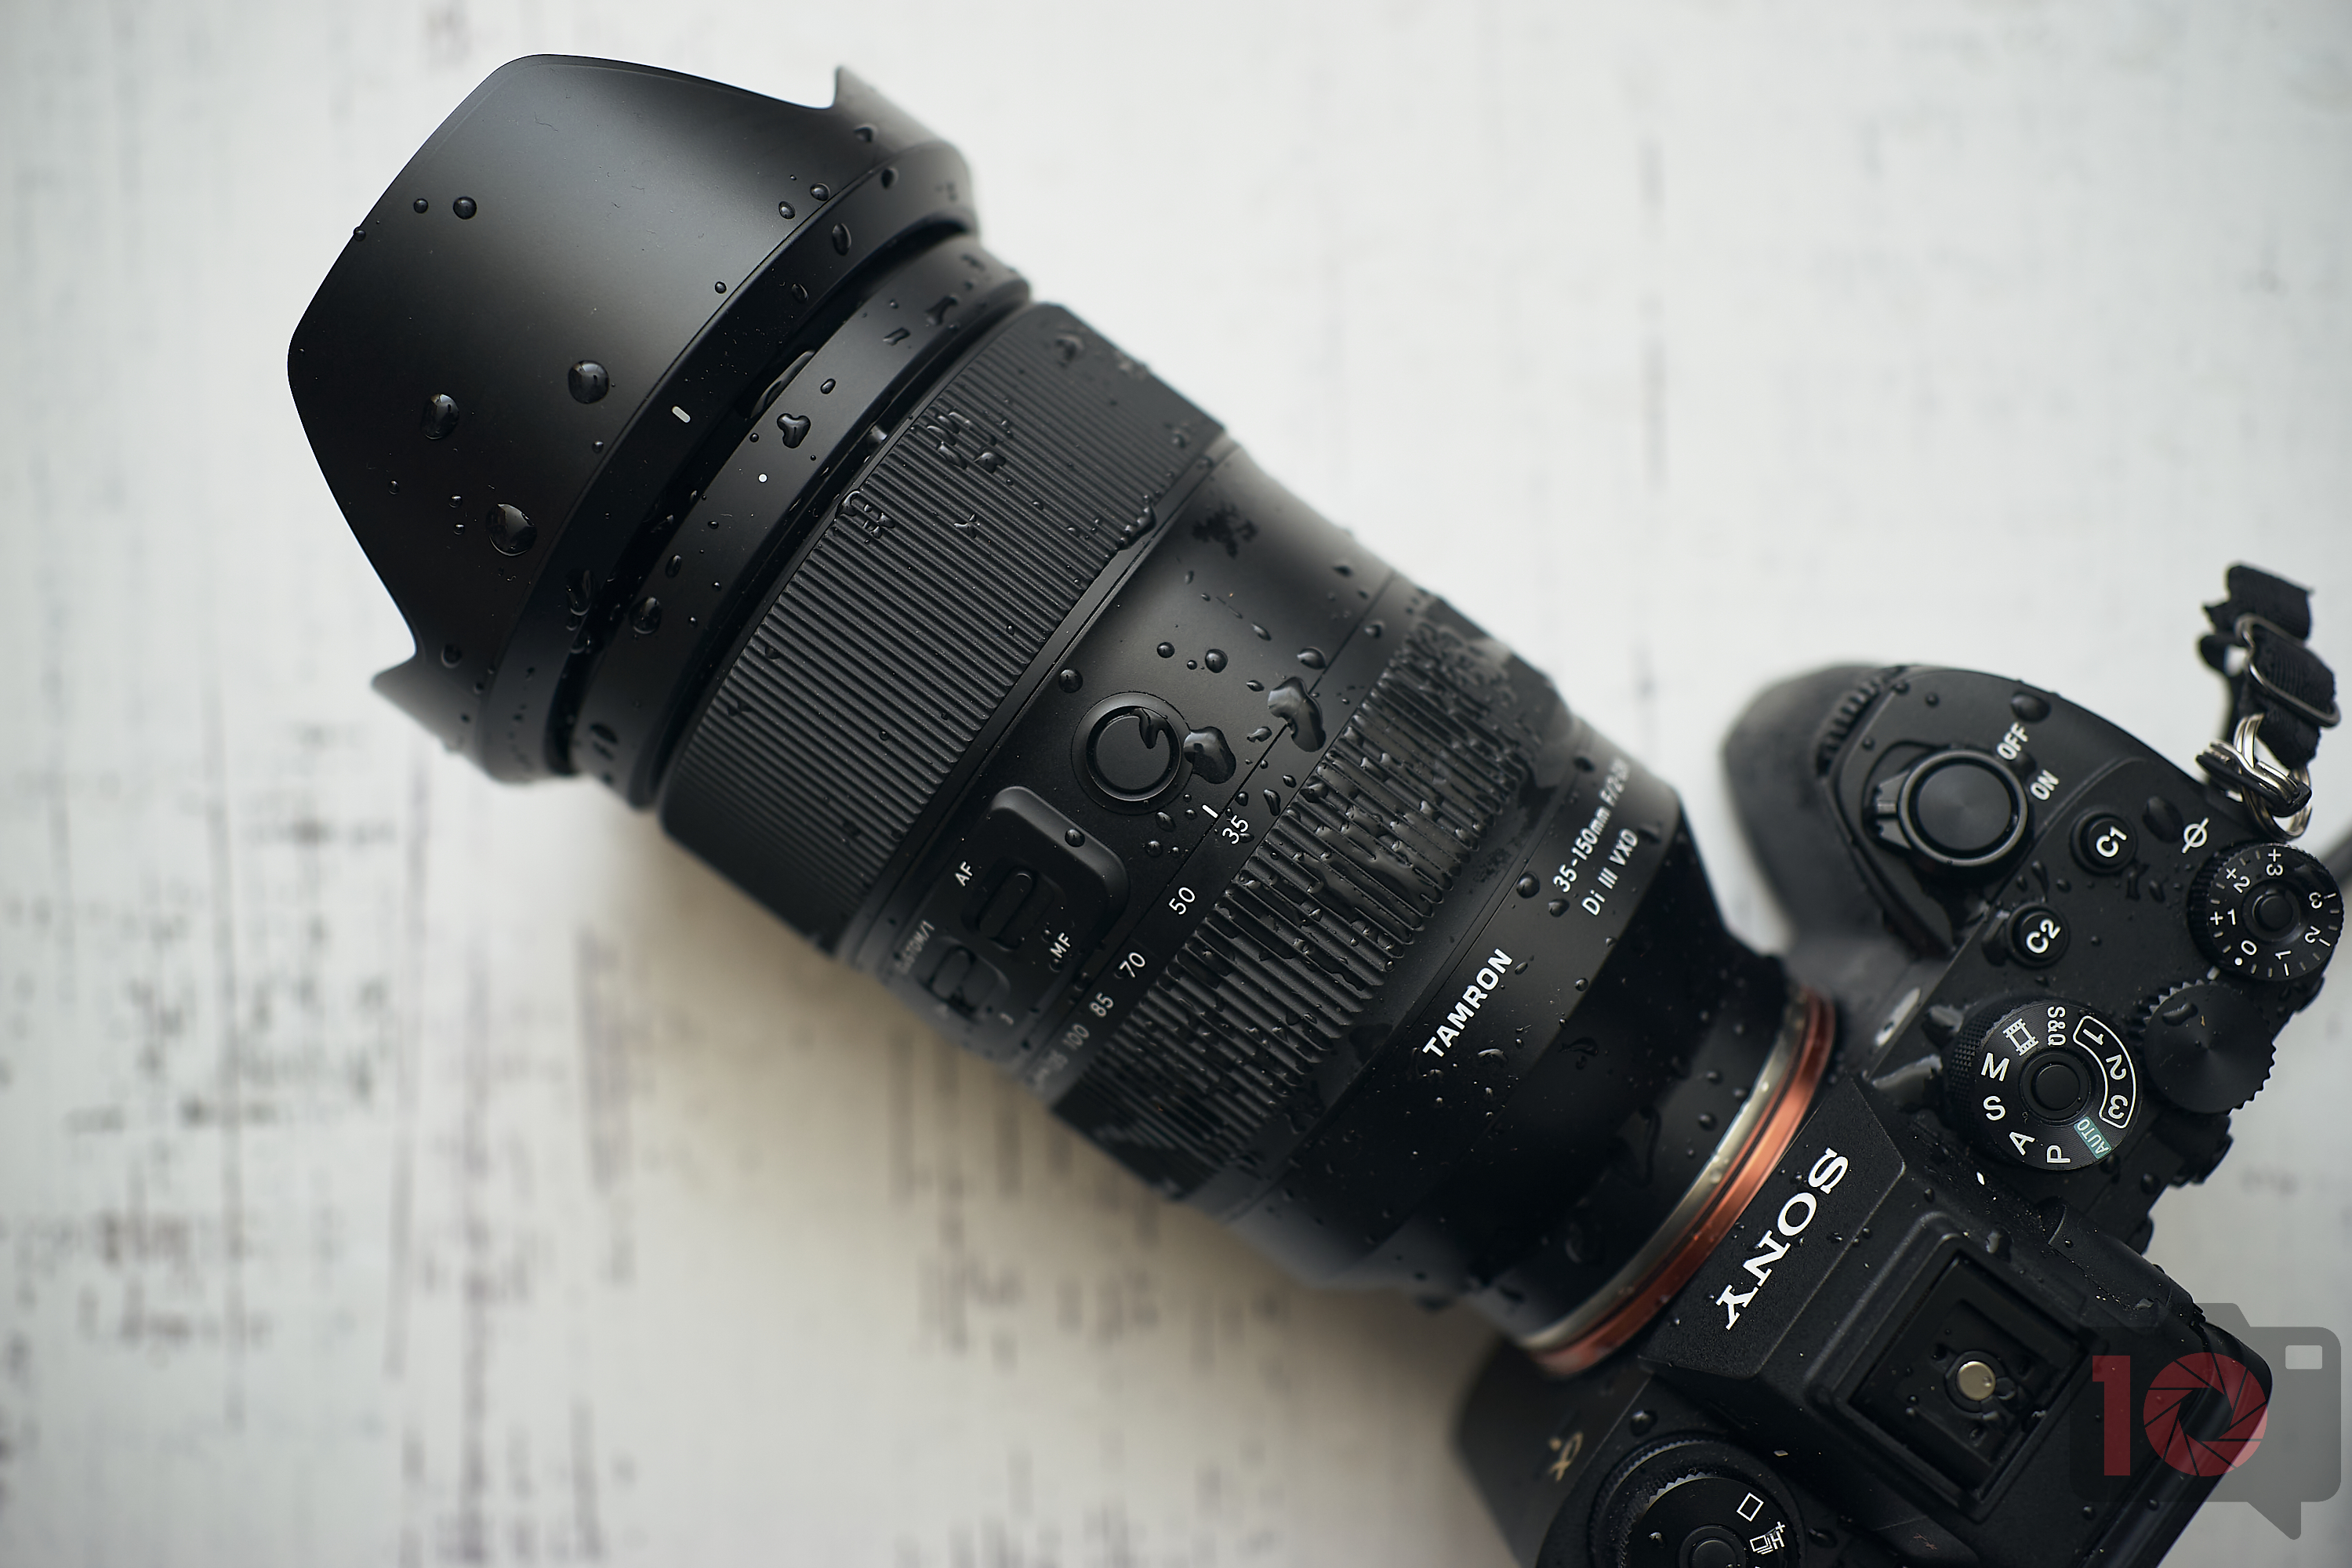 Tamron 35-150mm F2-2.8 Di III VXD Review: One of the Best